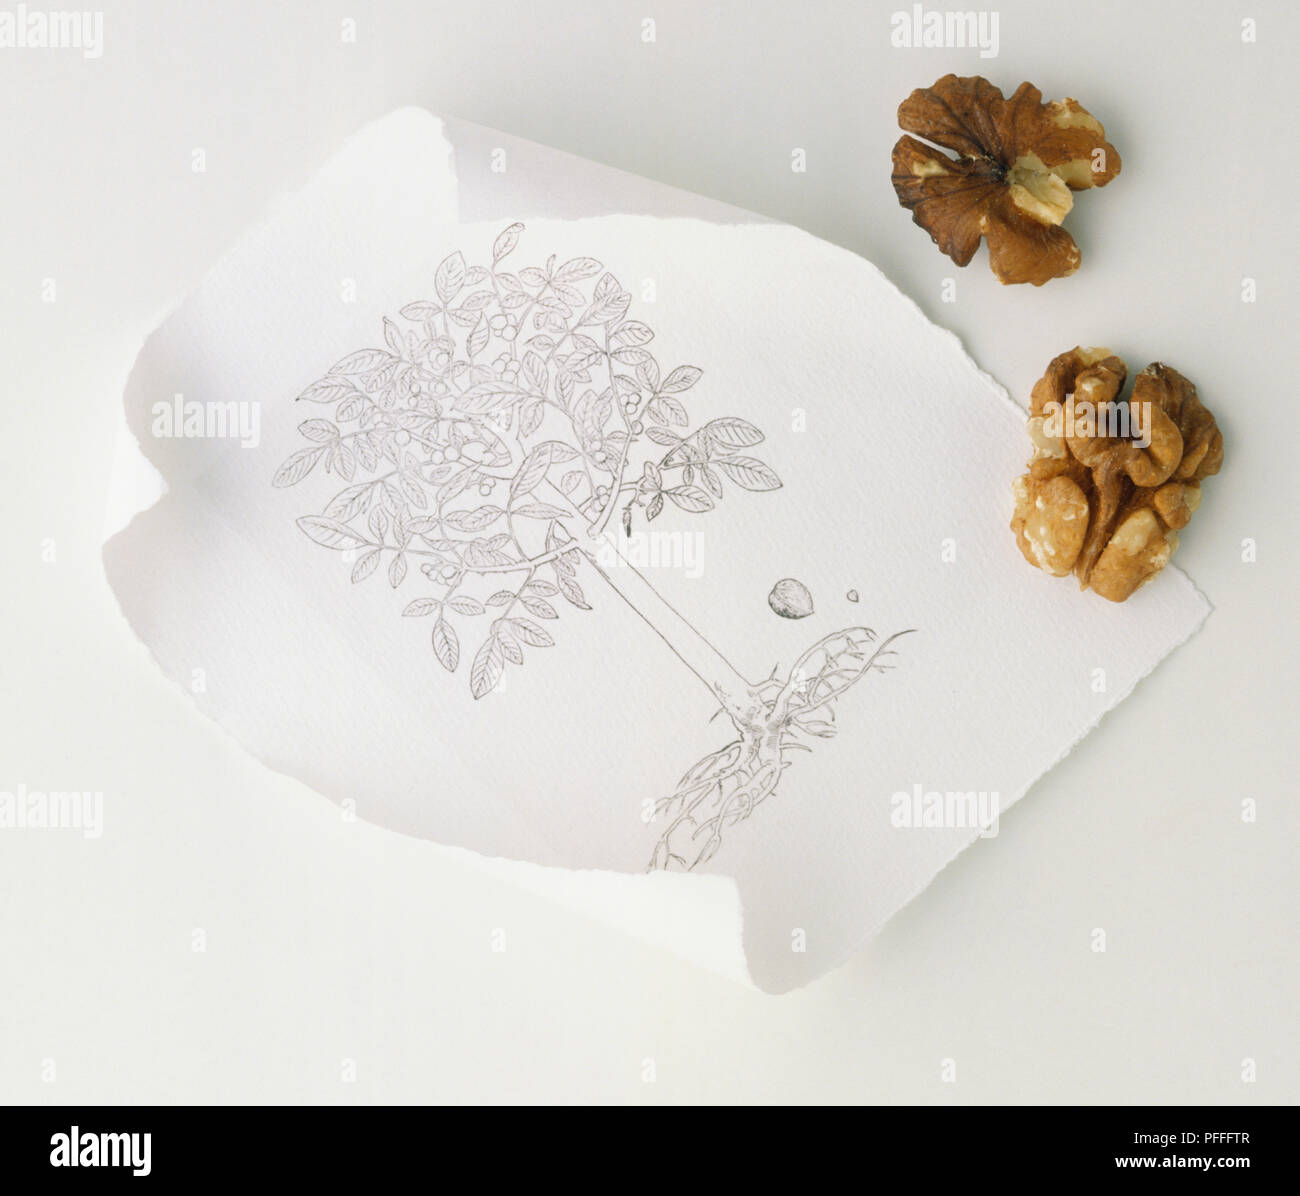 Above view, raw Walnuts on a curled illustration of a Walnut tree. Stock Photo